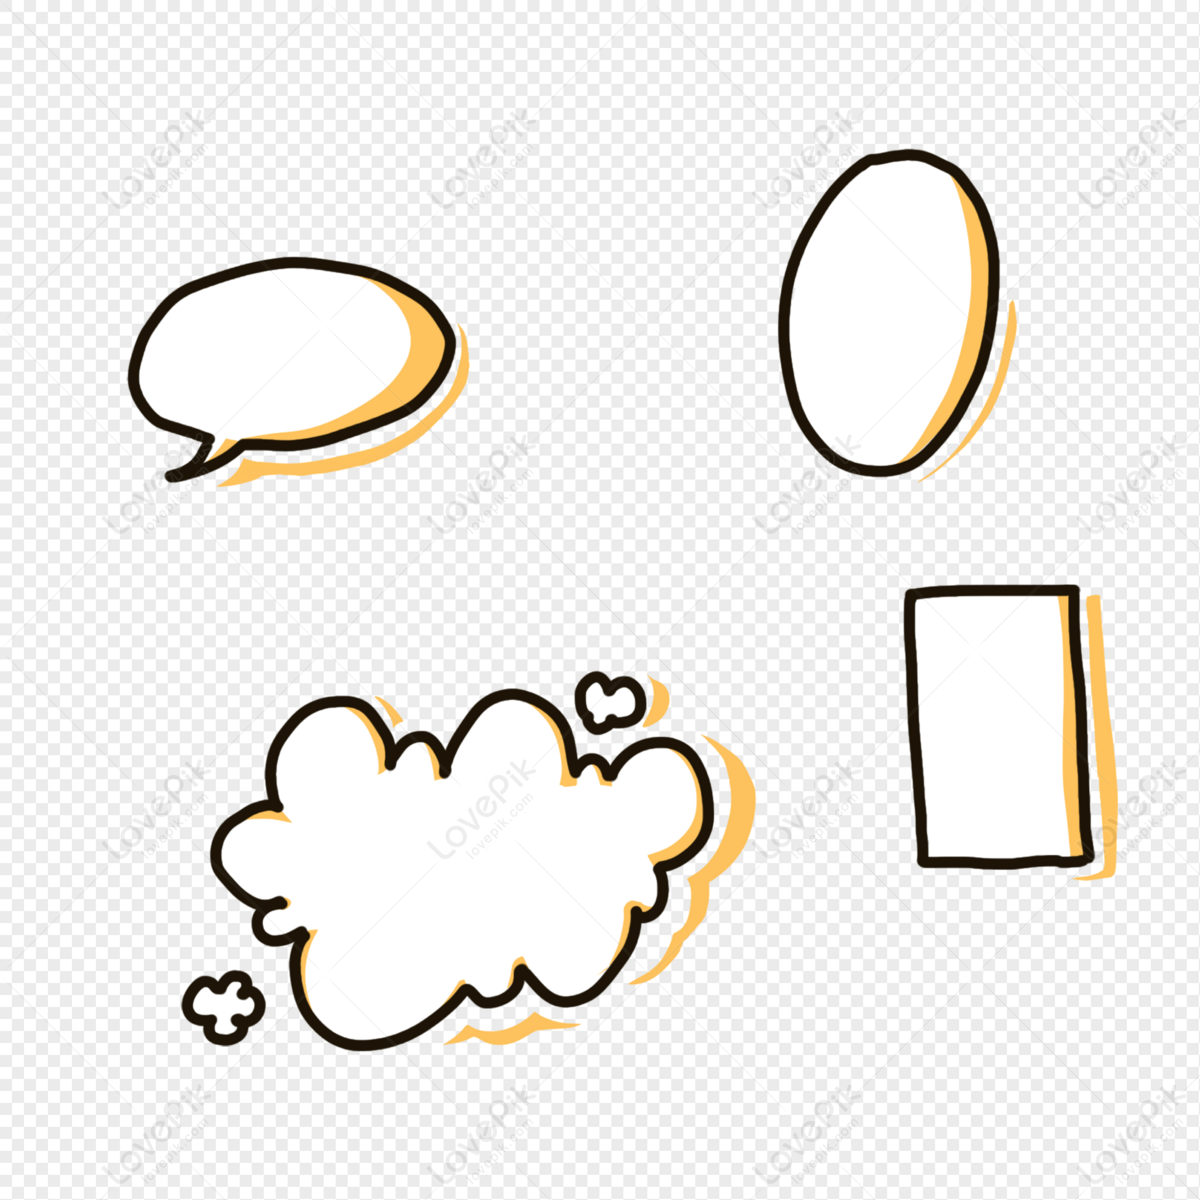 Yellow Hand Drawn Speech Bubble PNG Hd Transparent Image And Clipart Image  For Free Download - Lovepik | 401422724